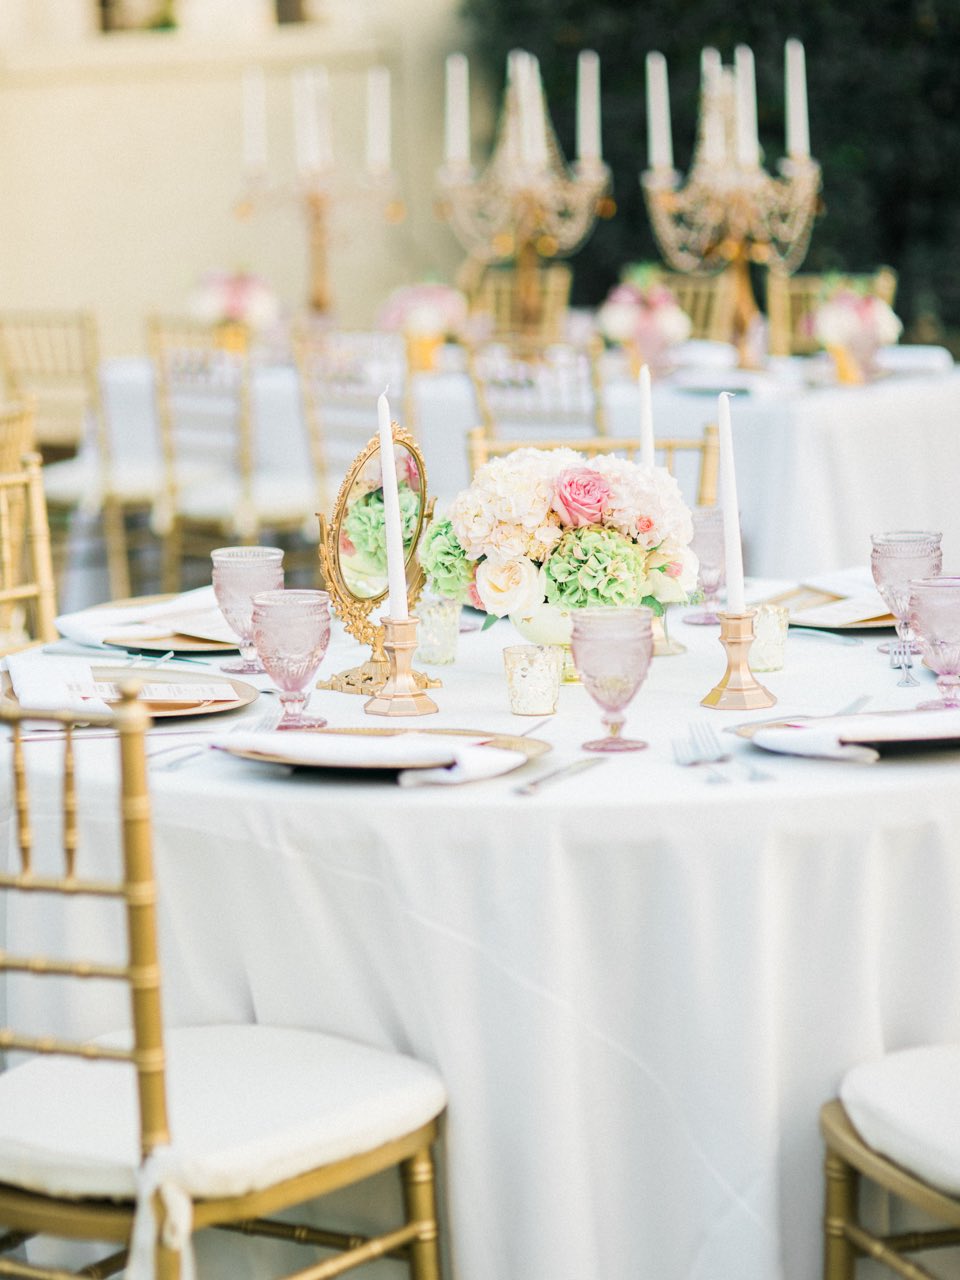 This pretty pink wedding is so cute!